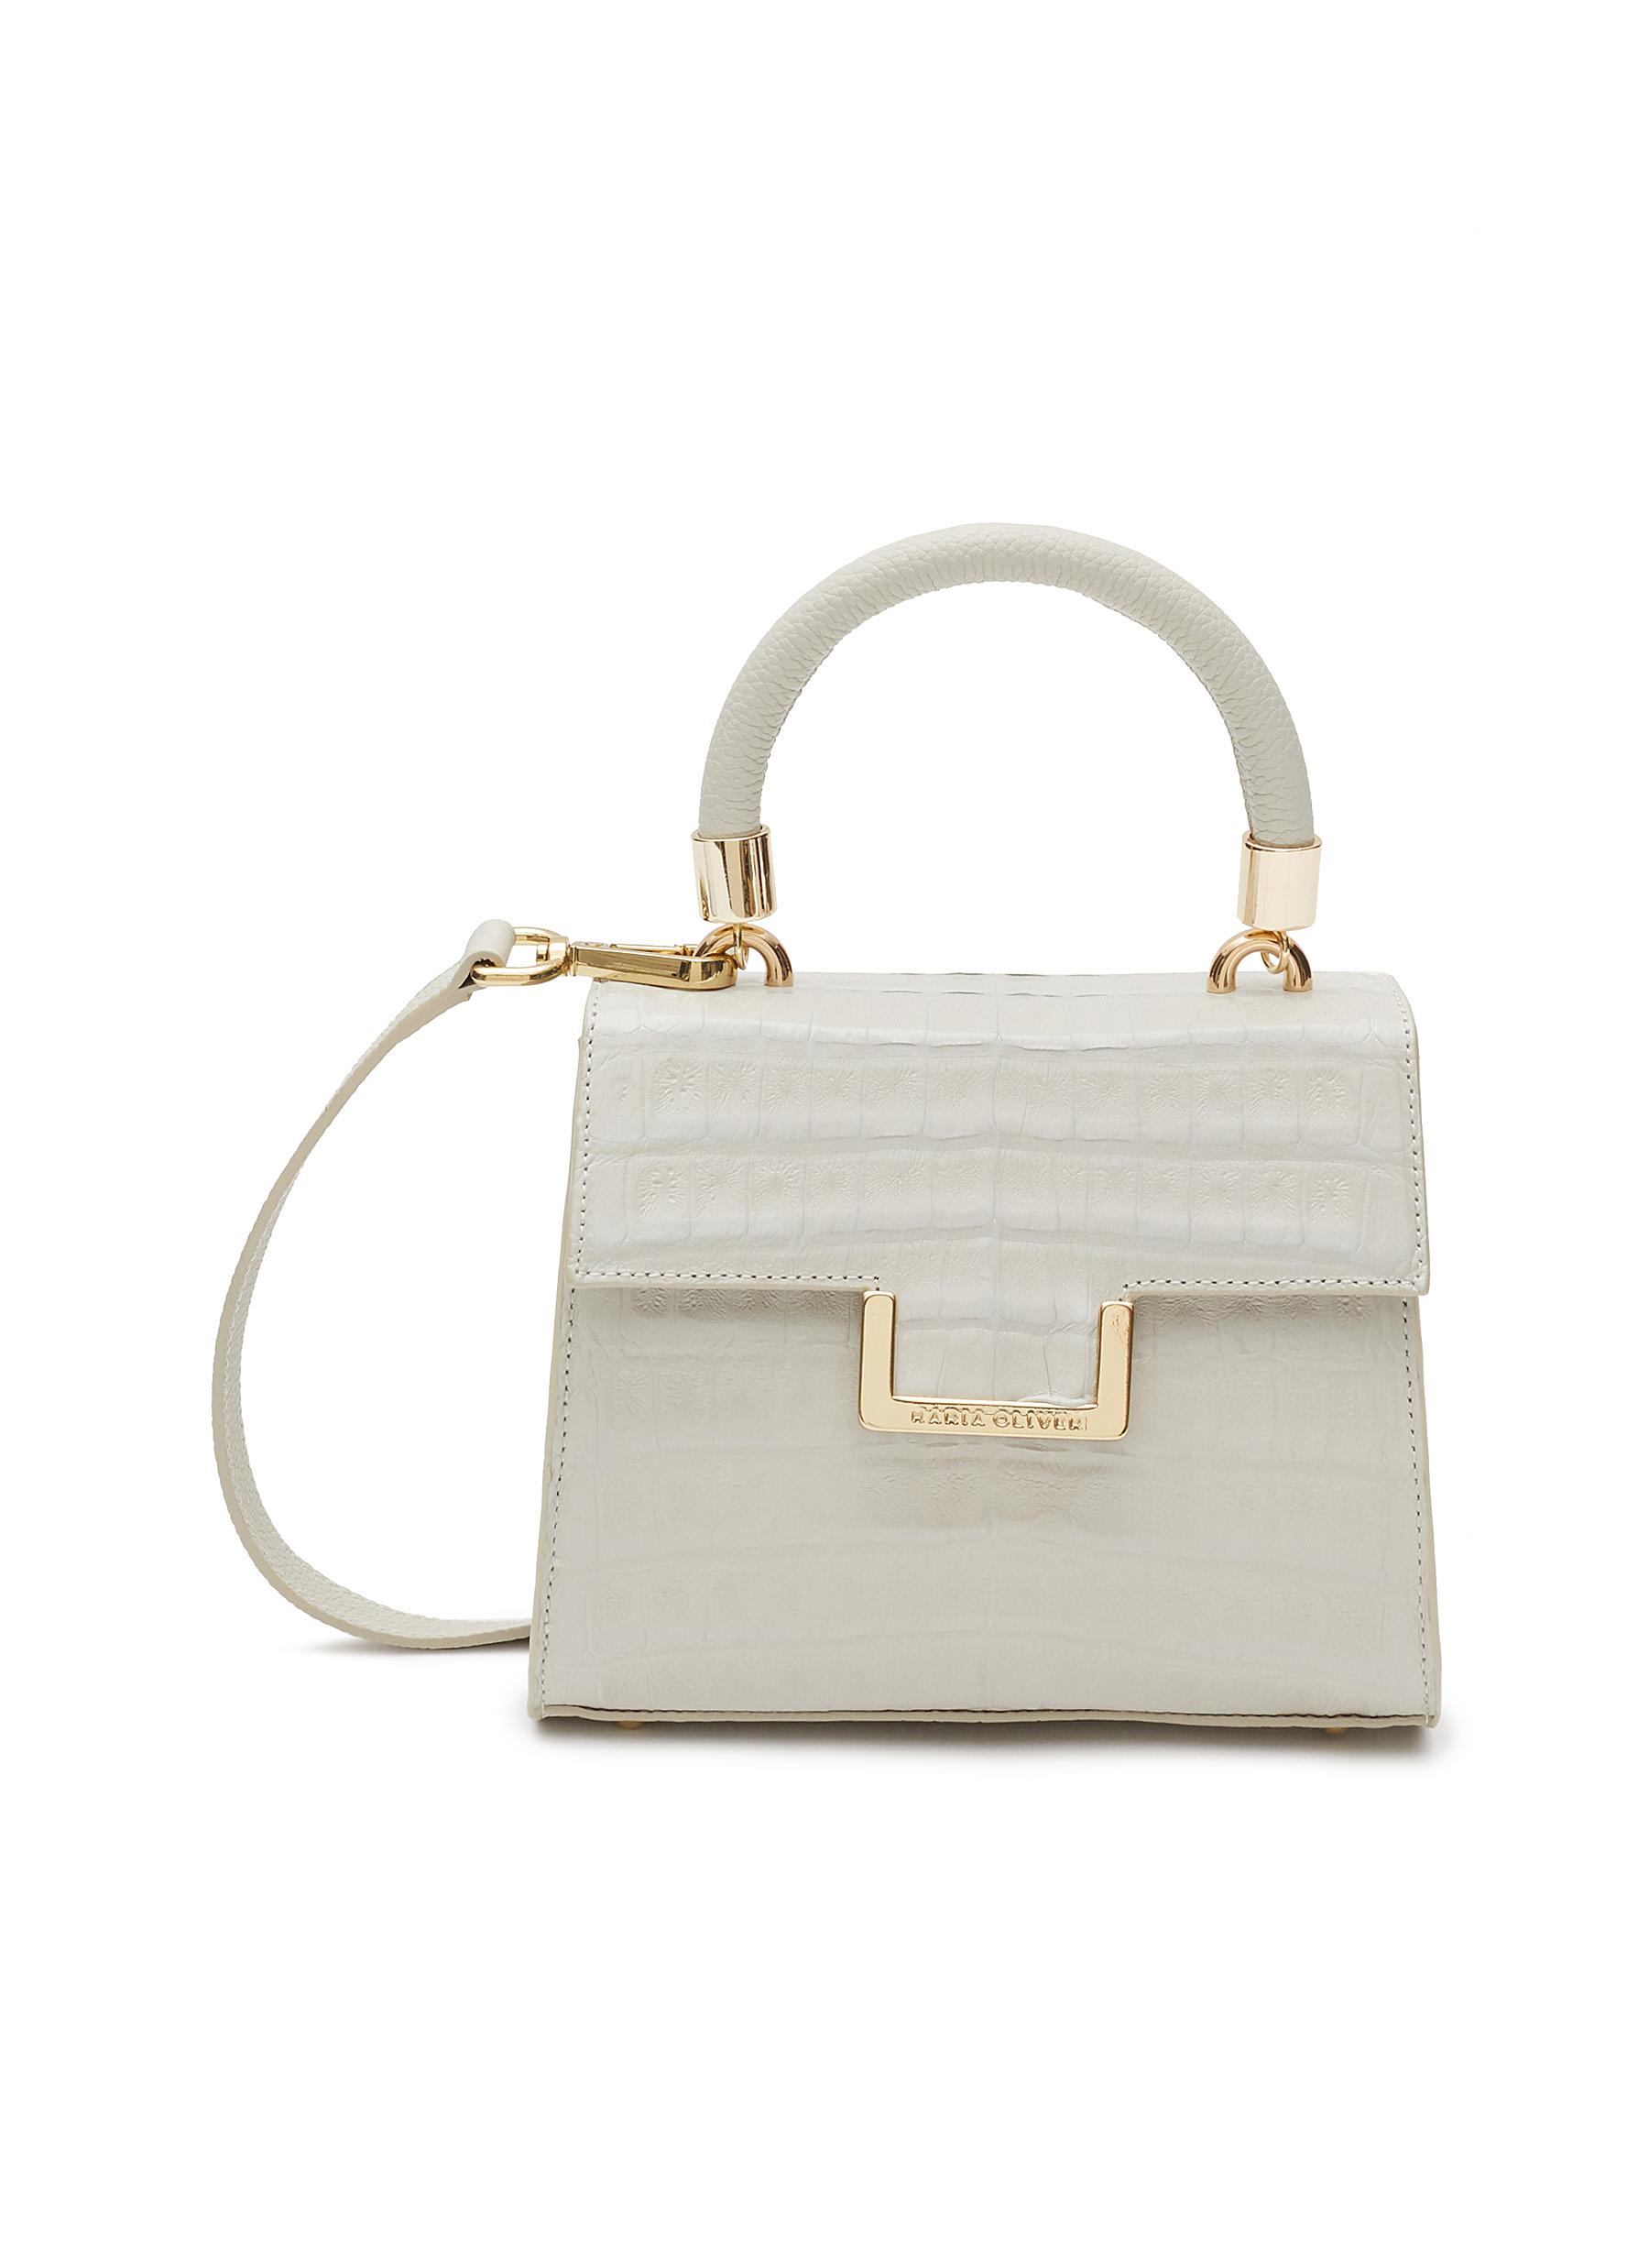 MARIA OLIVER MINI ‘MICHELLE' TOP HANDLE PYTHON LEATHER BAG